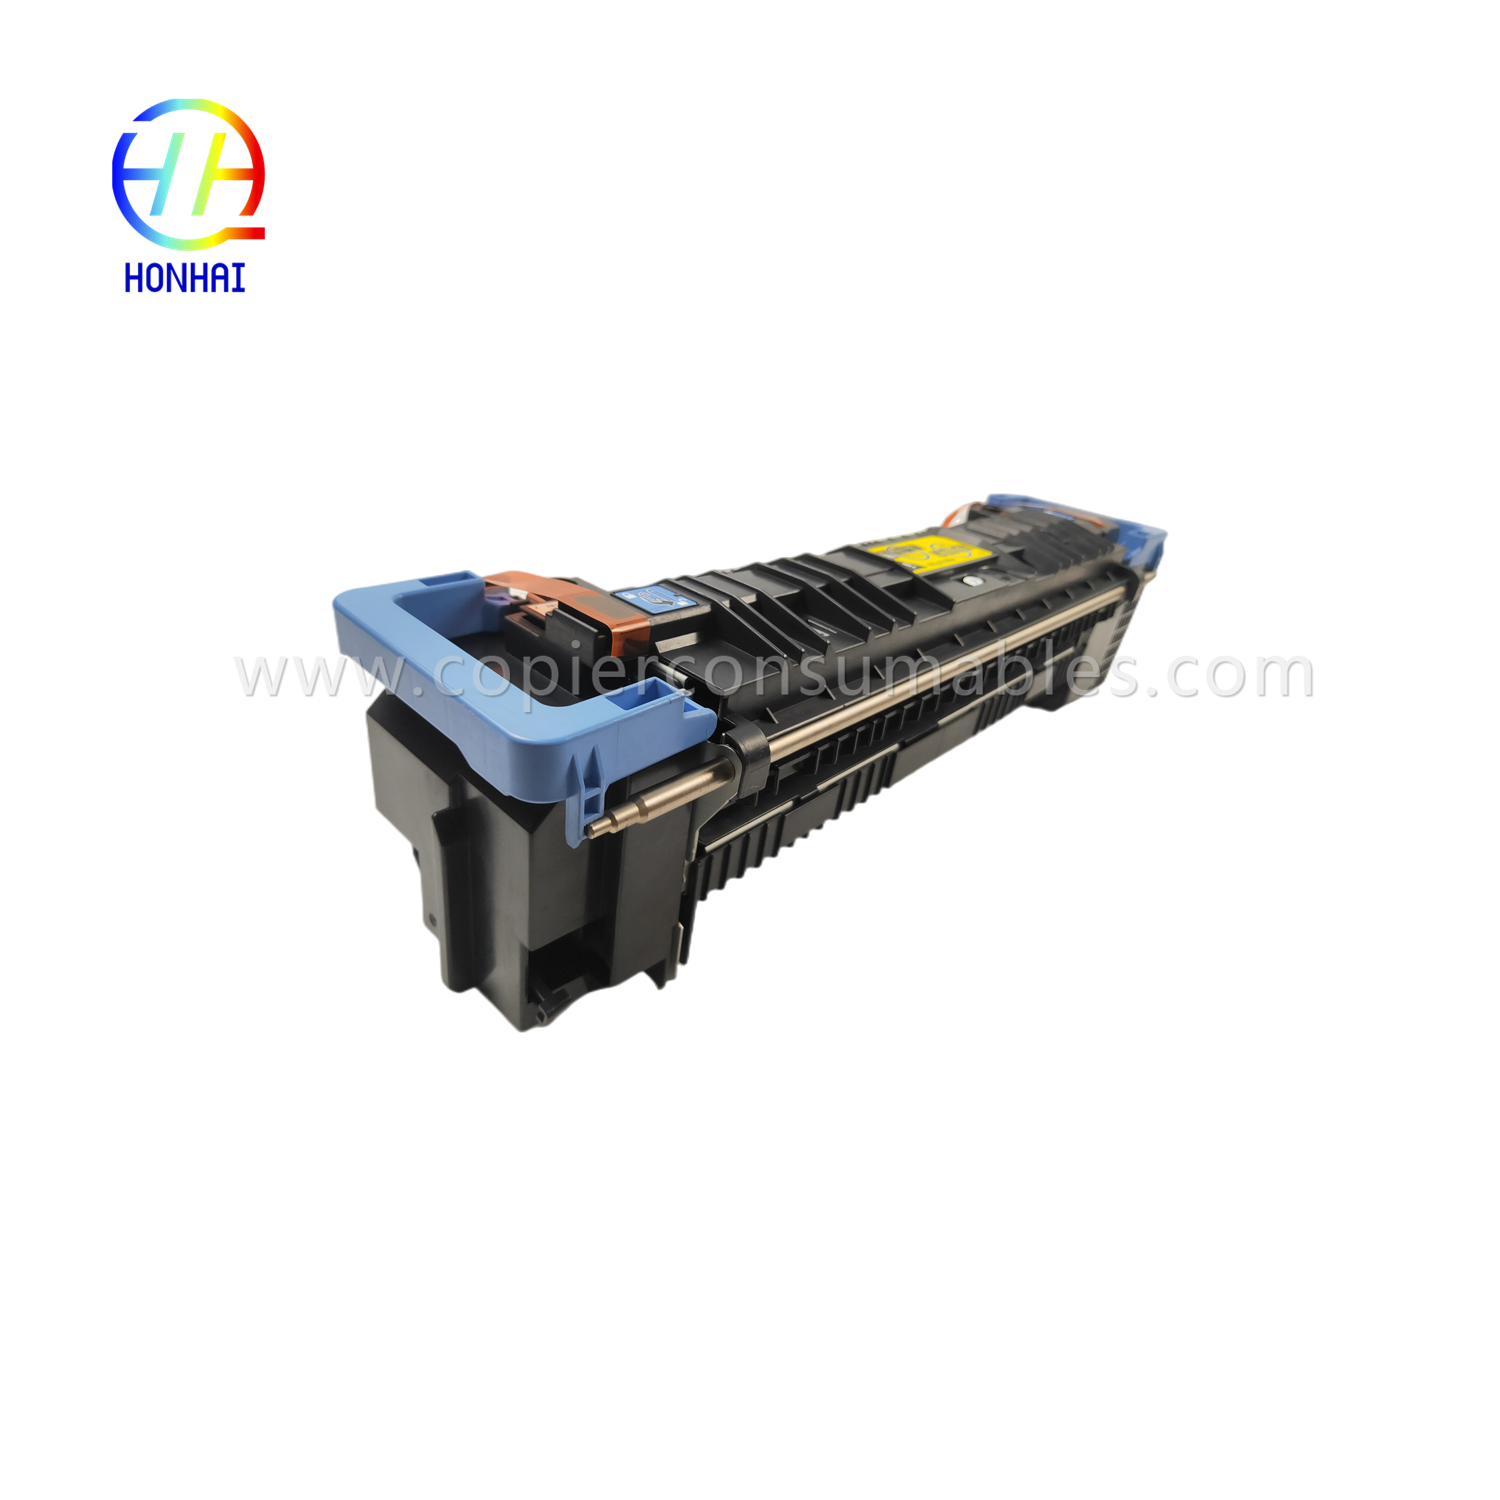 https://c585.goodao.net/fuser-assembly-unit-for-hp-m855-m880-m855dn-m855xh-m880z-m880z-c1n54-67901-c1n58-67901-fusing-heating-fixing-product/assy